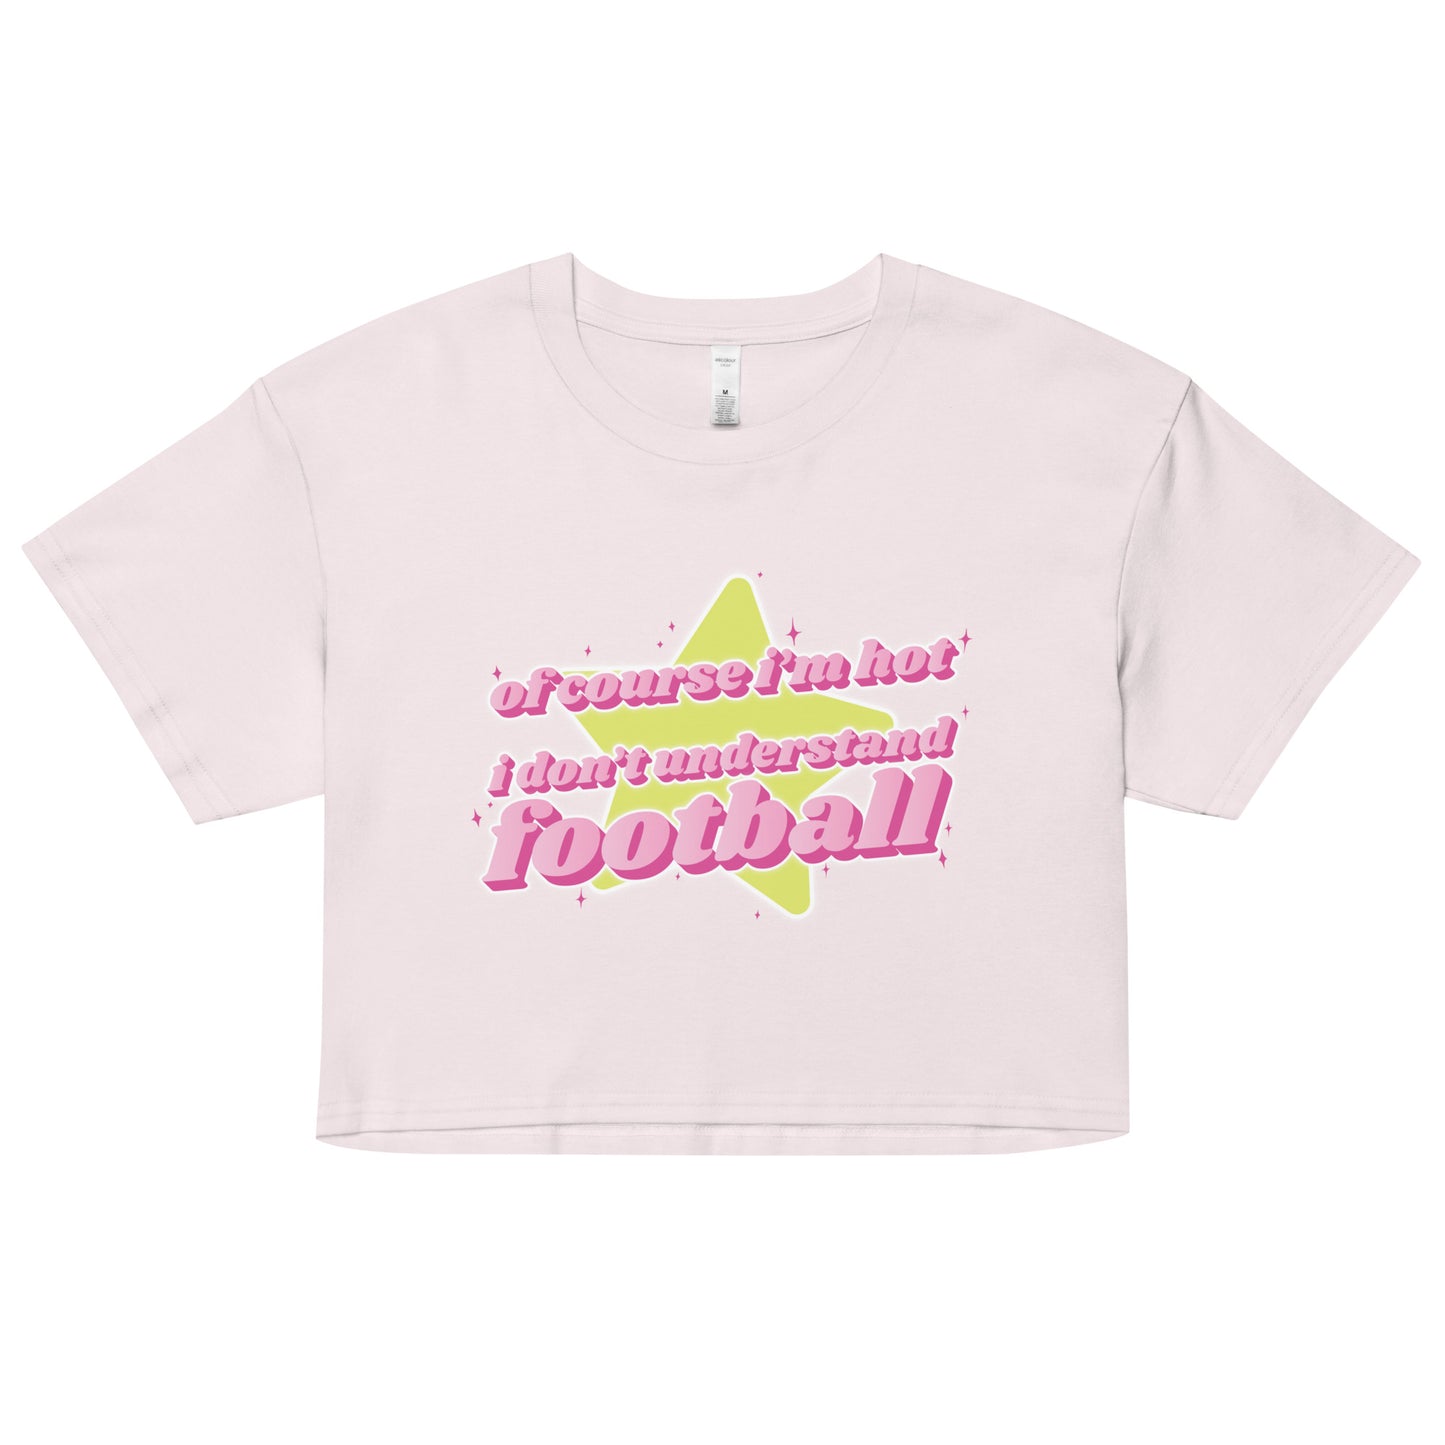 Of Course I'm Hot (Football) crop top